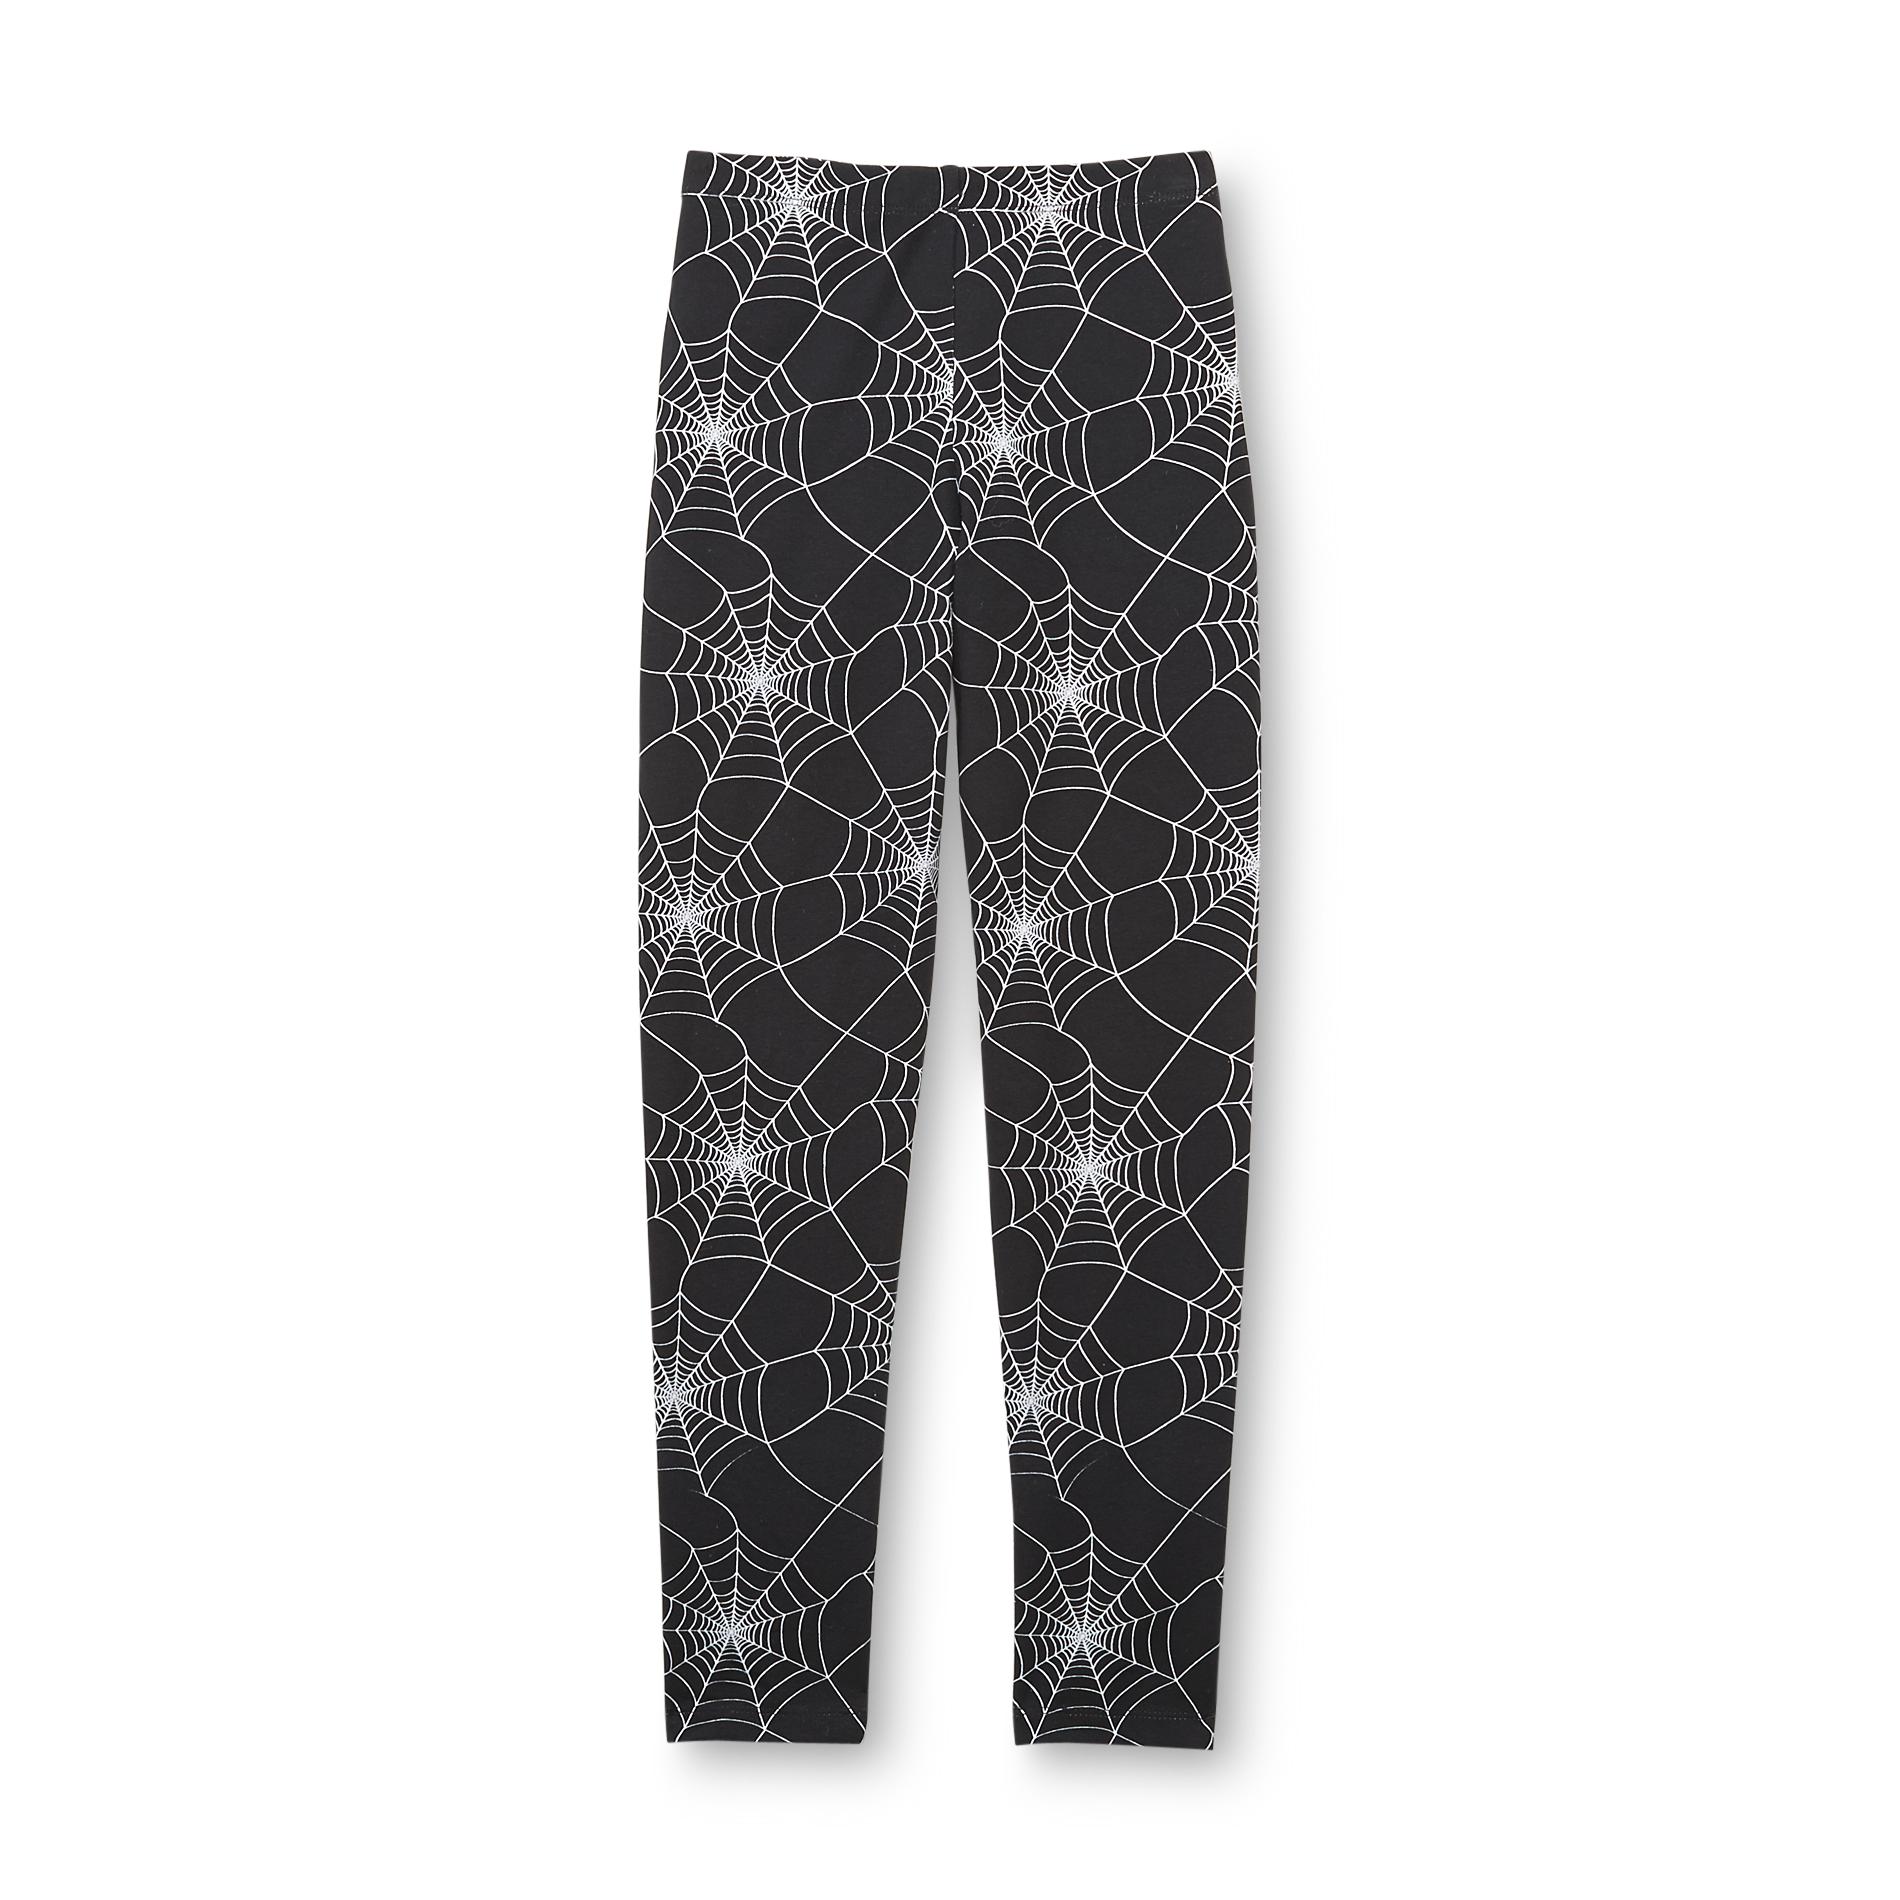 Holiday Editions Girl's Leggings - Spider Web